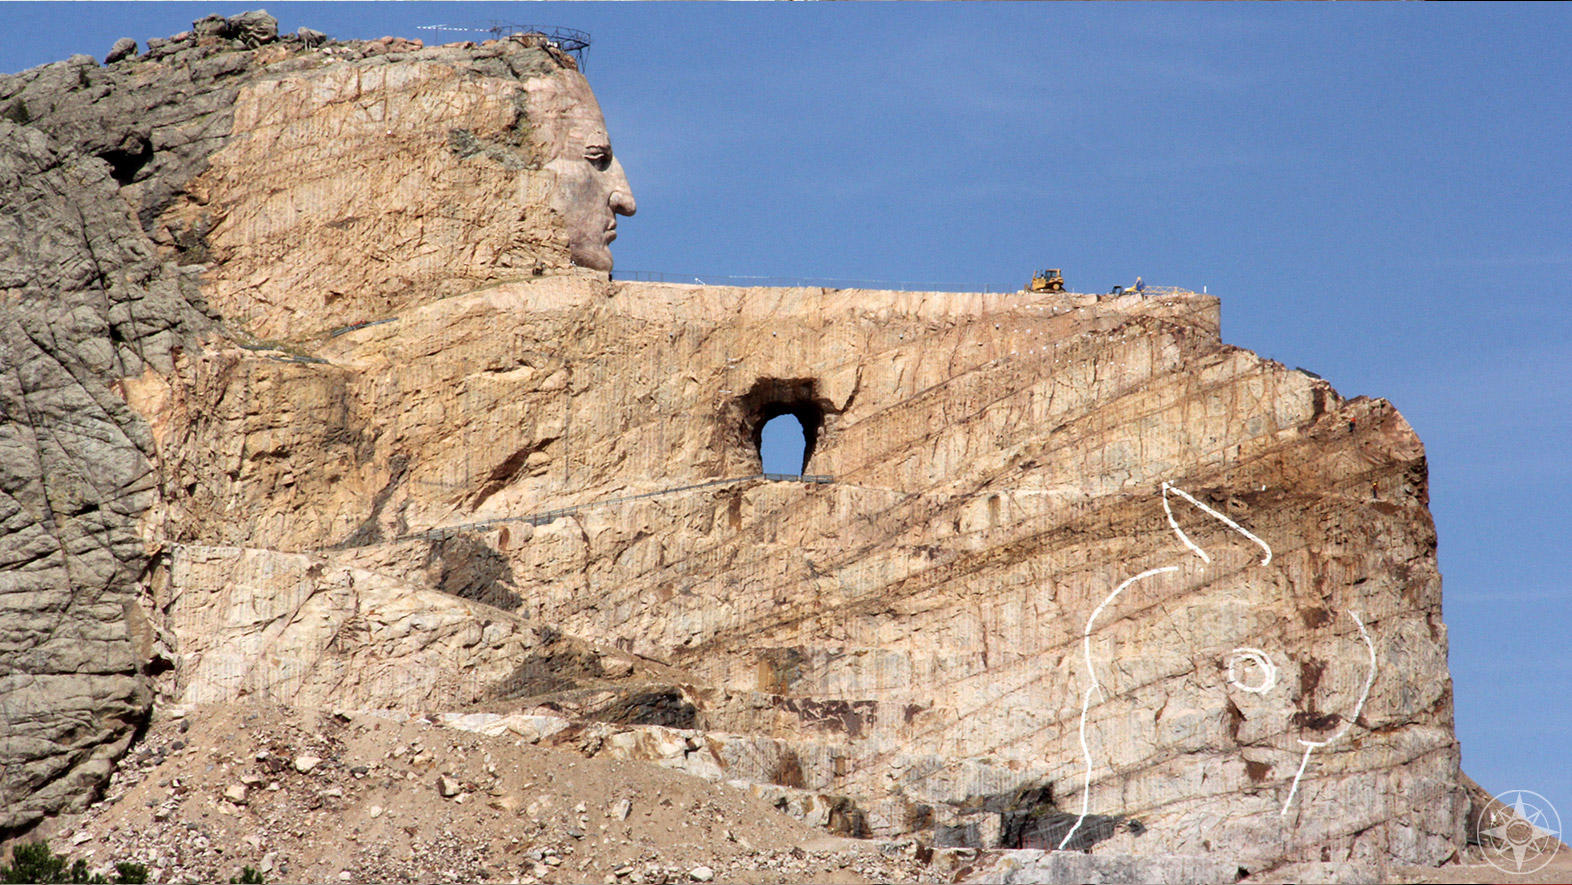 Closer look and a sense of scale, world's largest monument features North American Indian in South Dakota